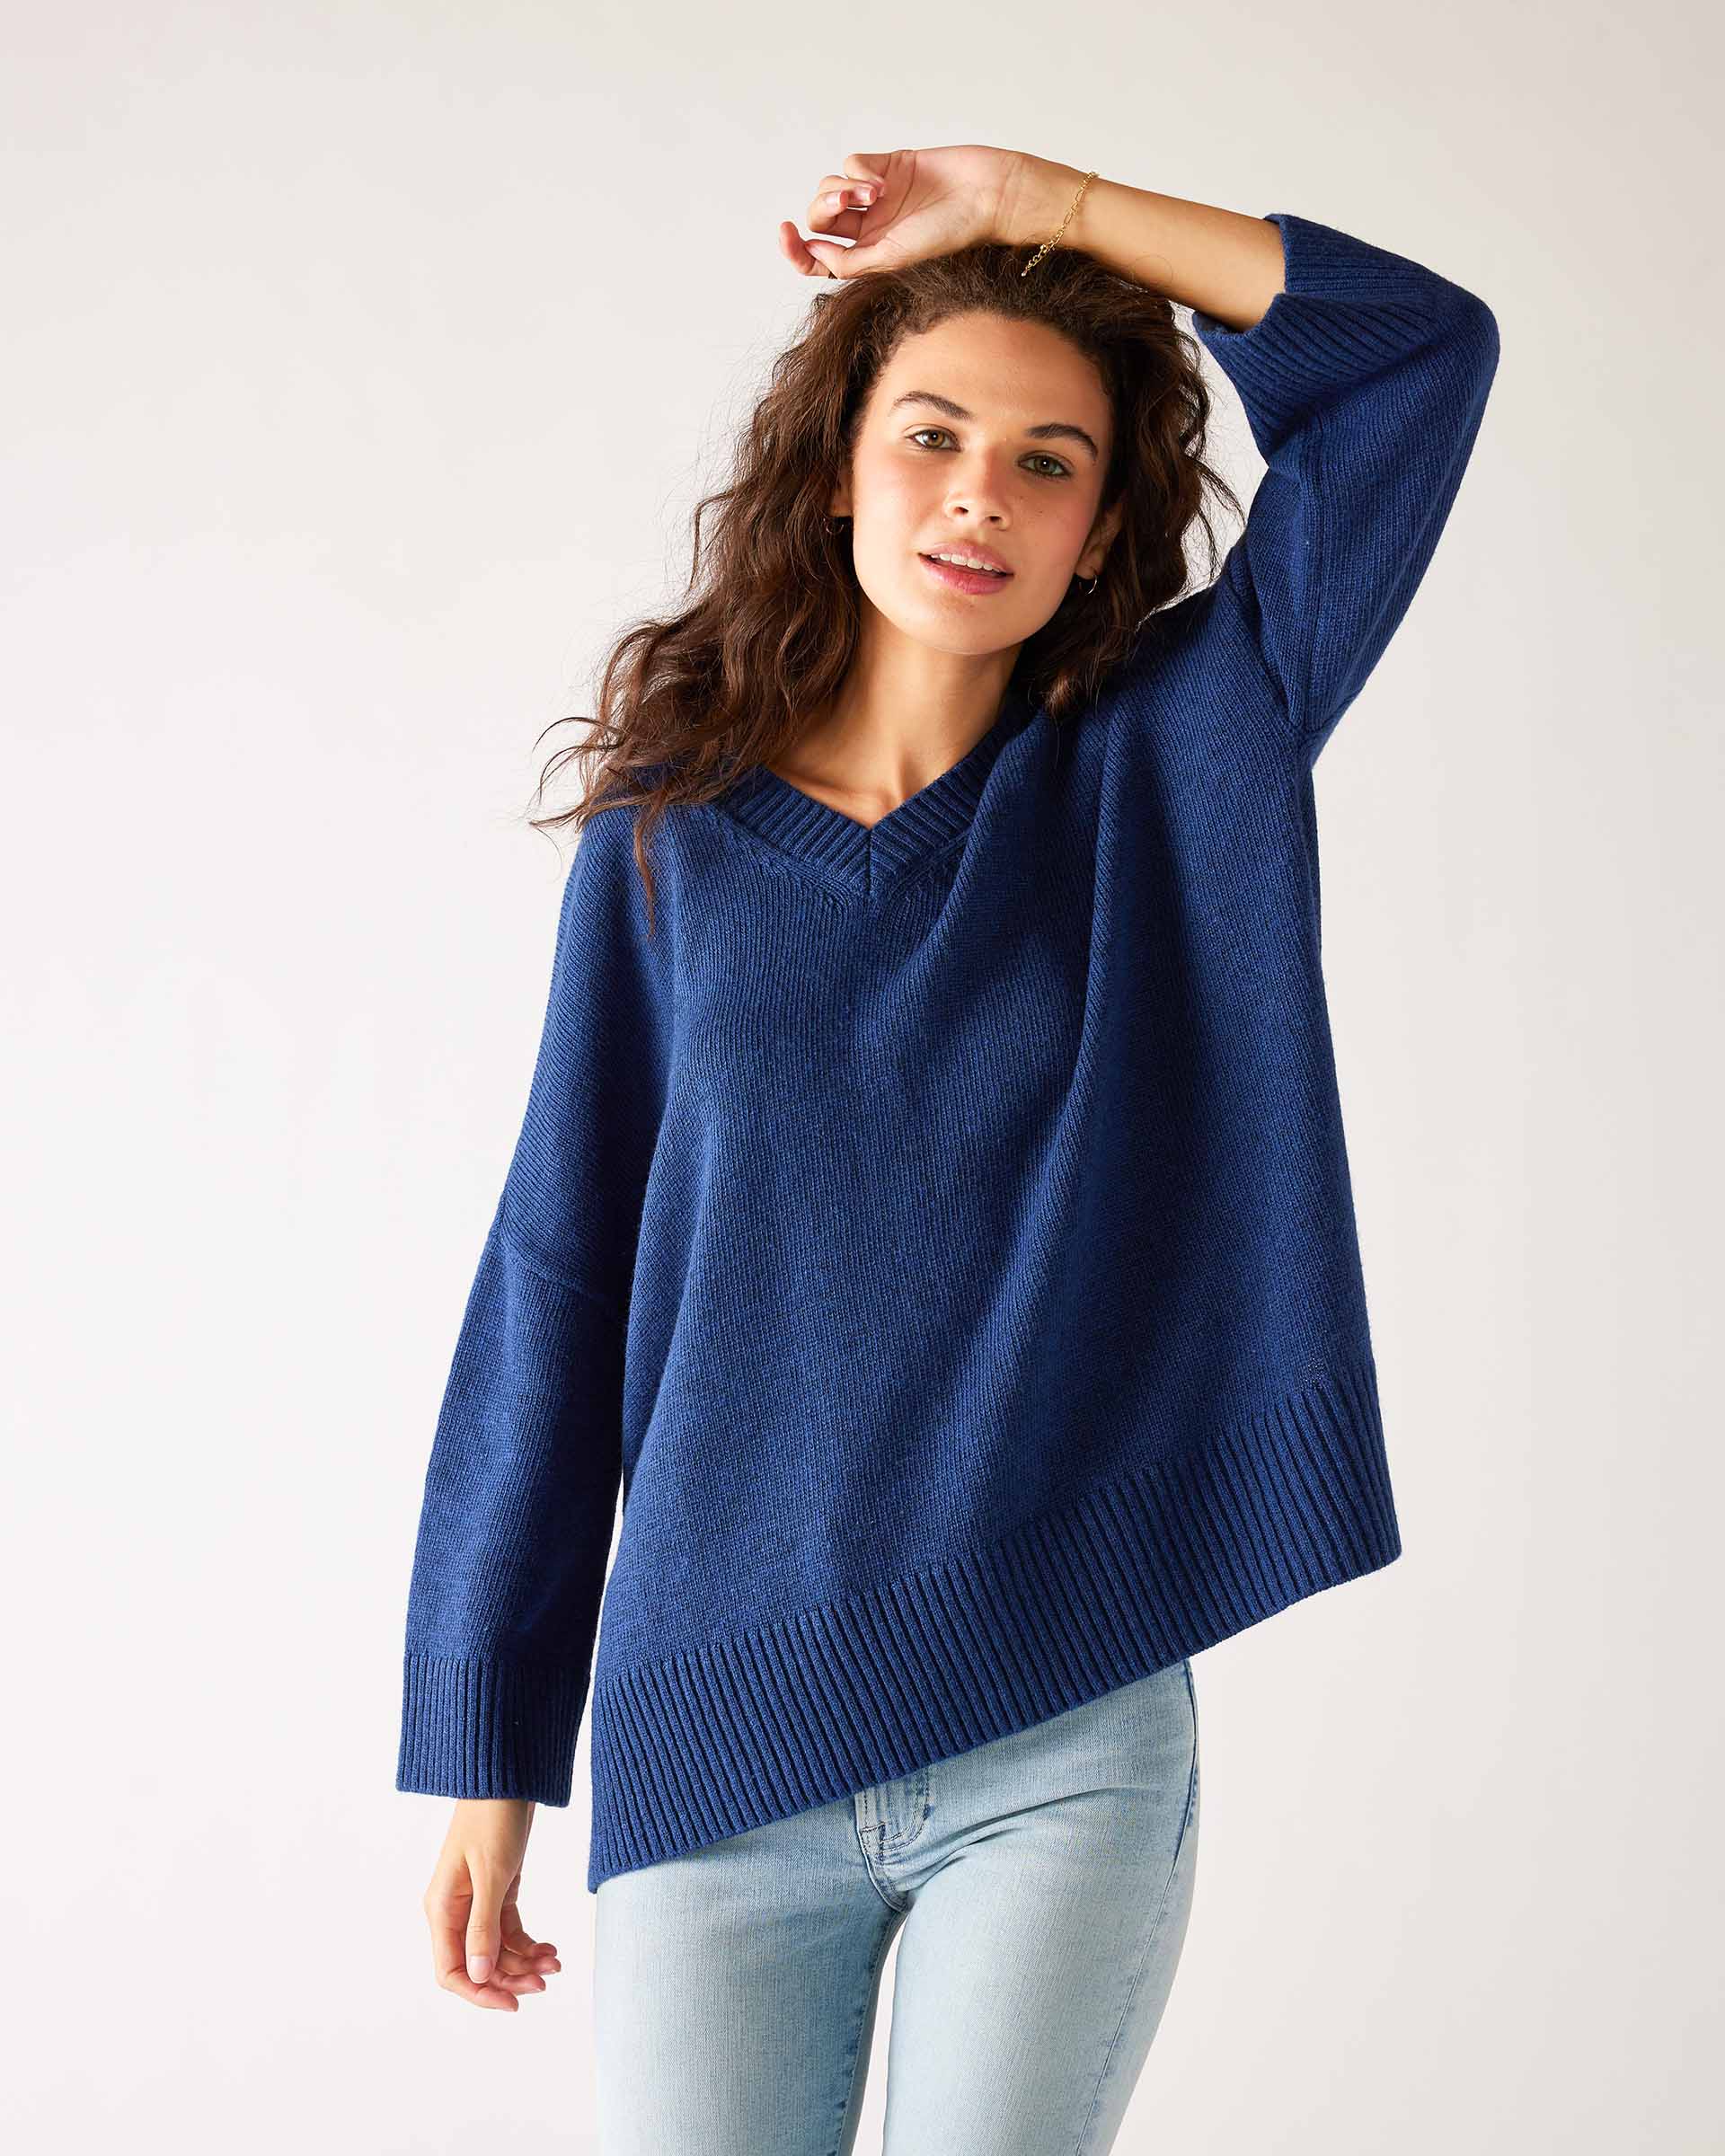 Women's Dark Blue Midweight Loose Fitting V-neck Sweater Front View Hand on Head